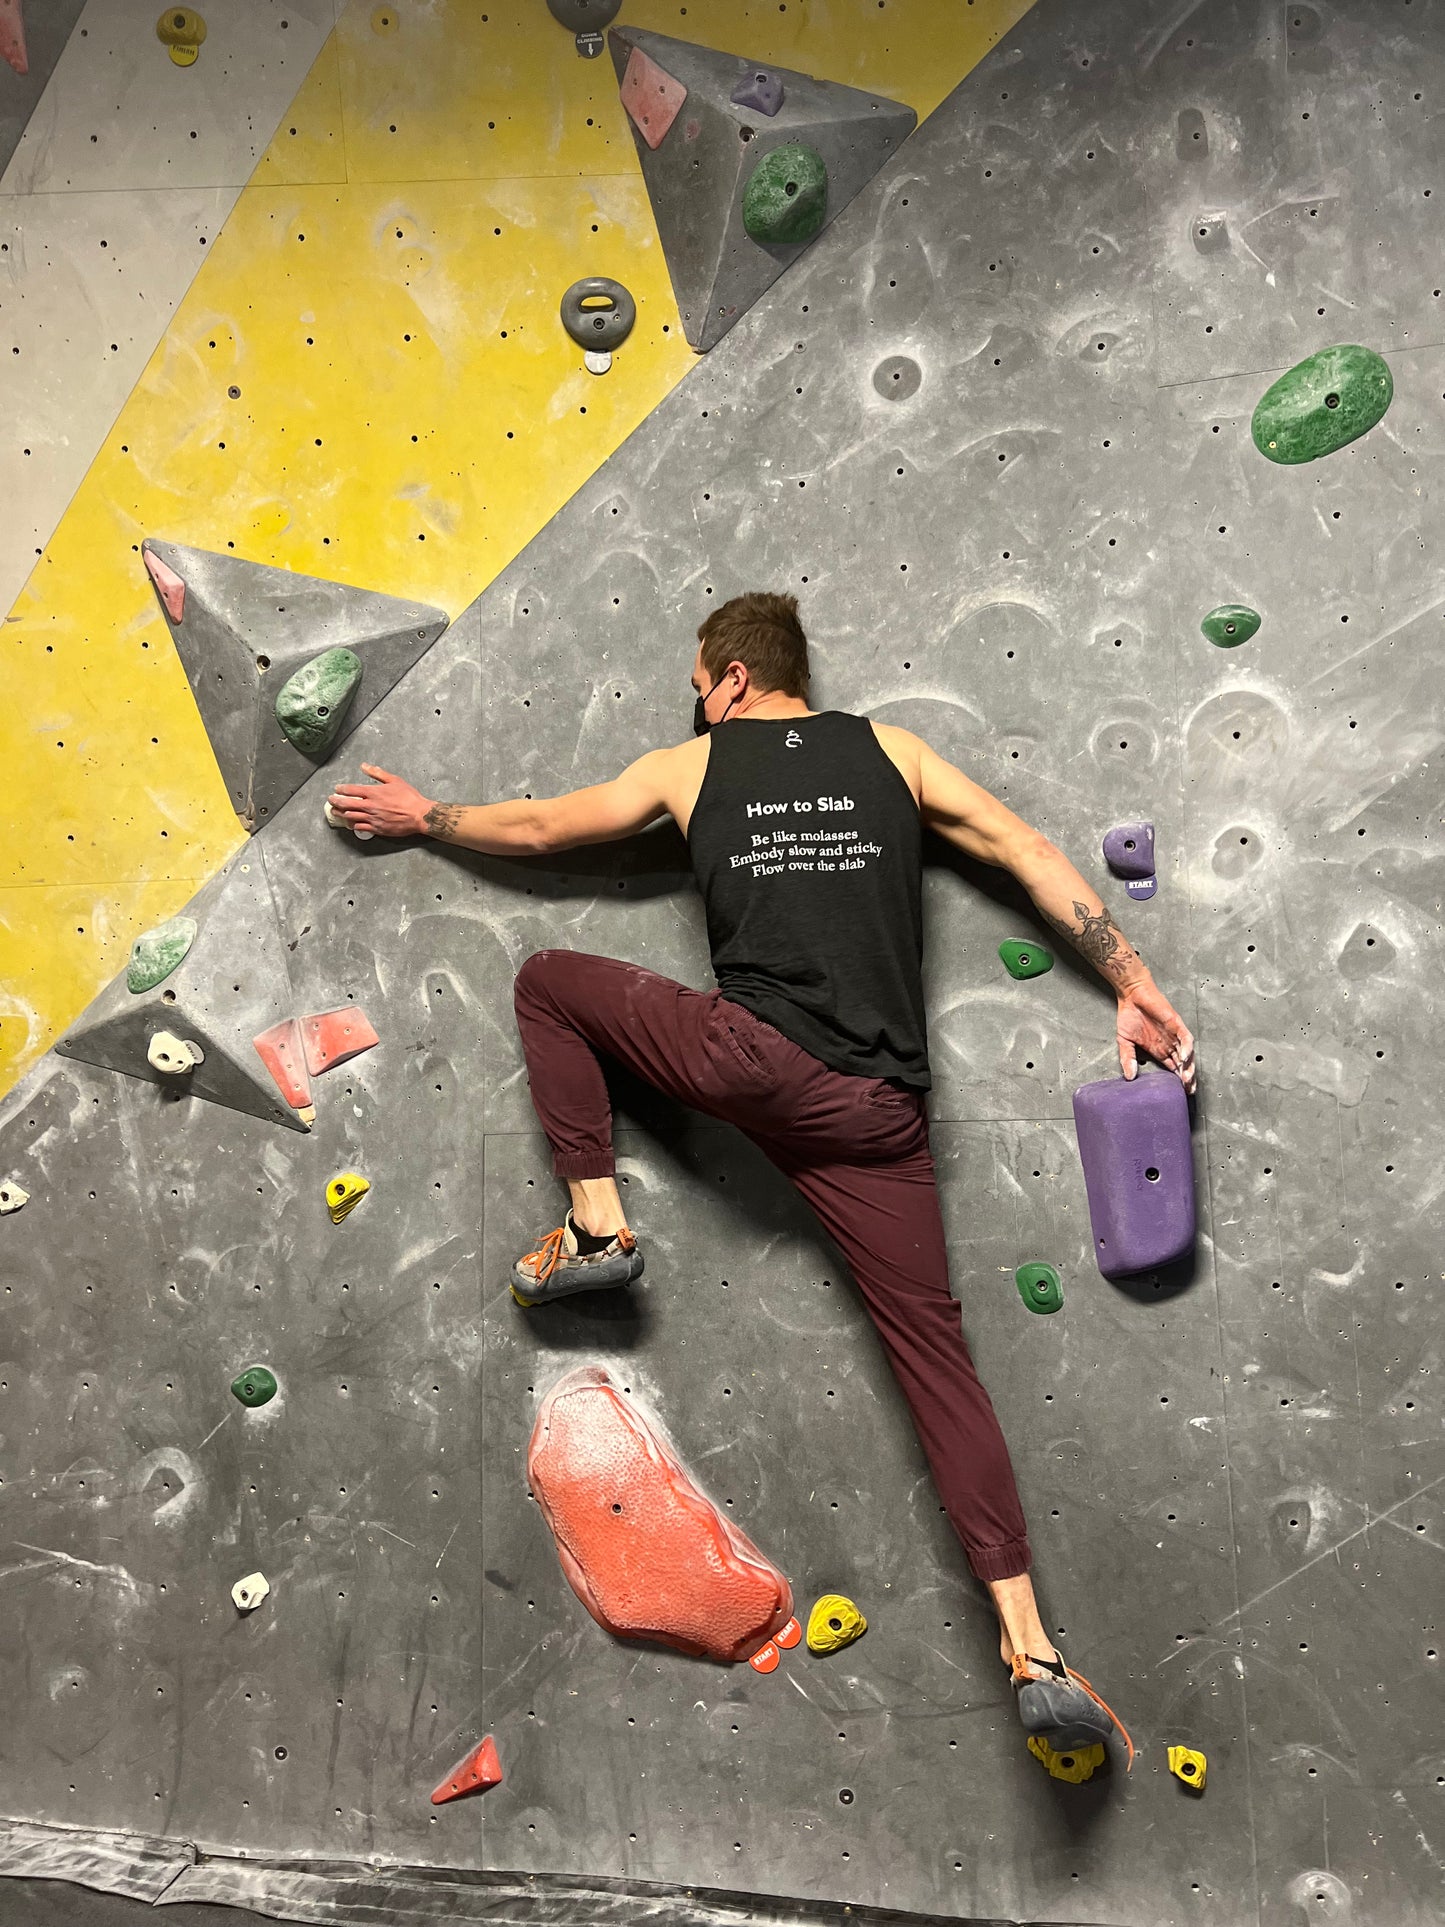 Charcoal black tank top shirt with How to Slab haiku on the back worn by male bouldering on a climbing wall in the gym